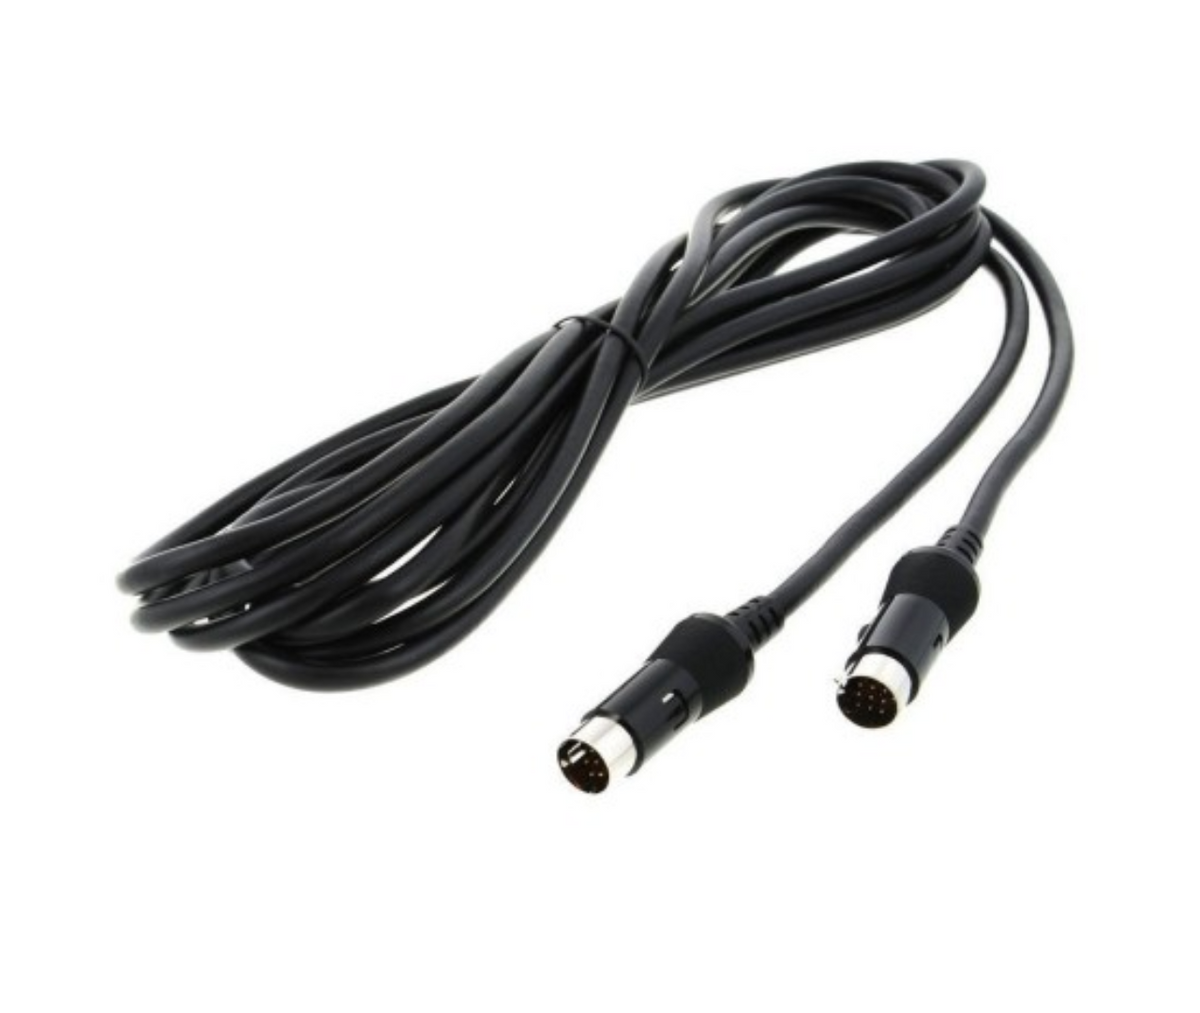 Roland GKC-5 13-Pin Guitar Cables High-quality 15 Feet 13-pin Cable